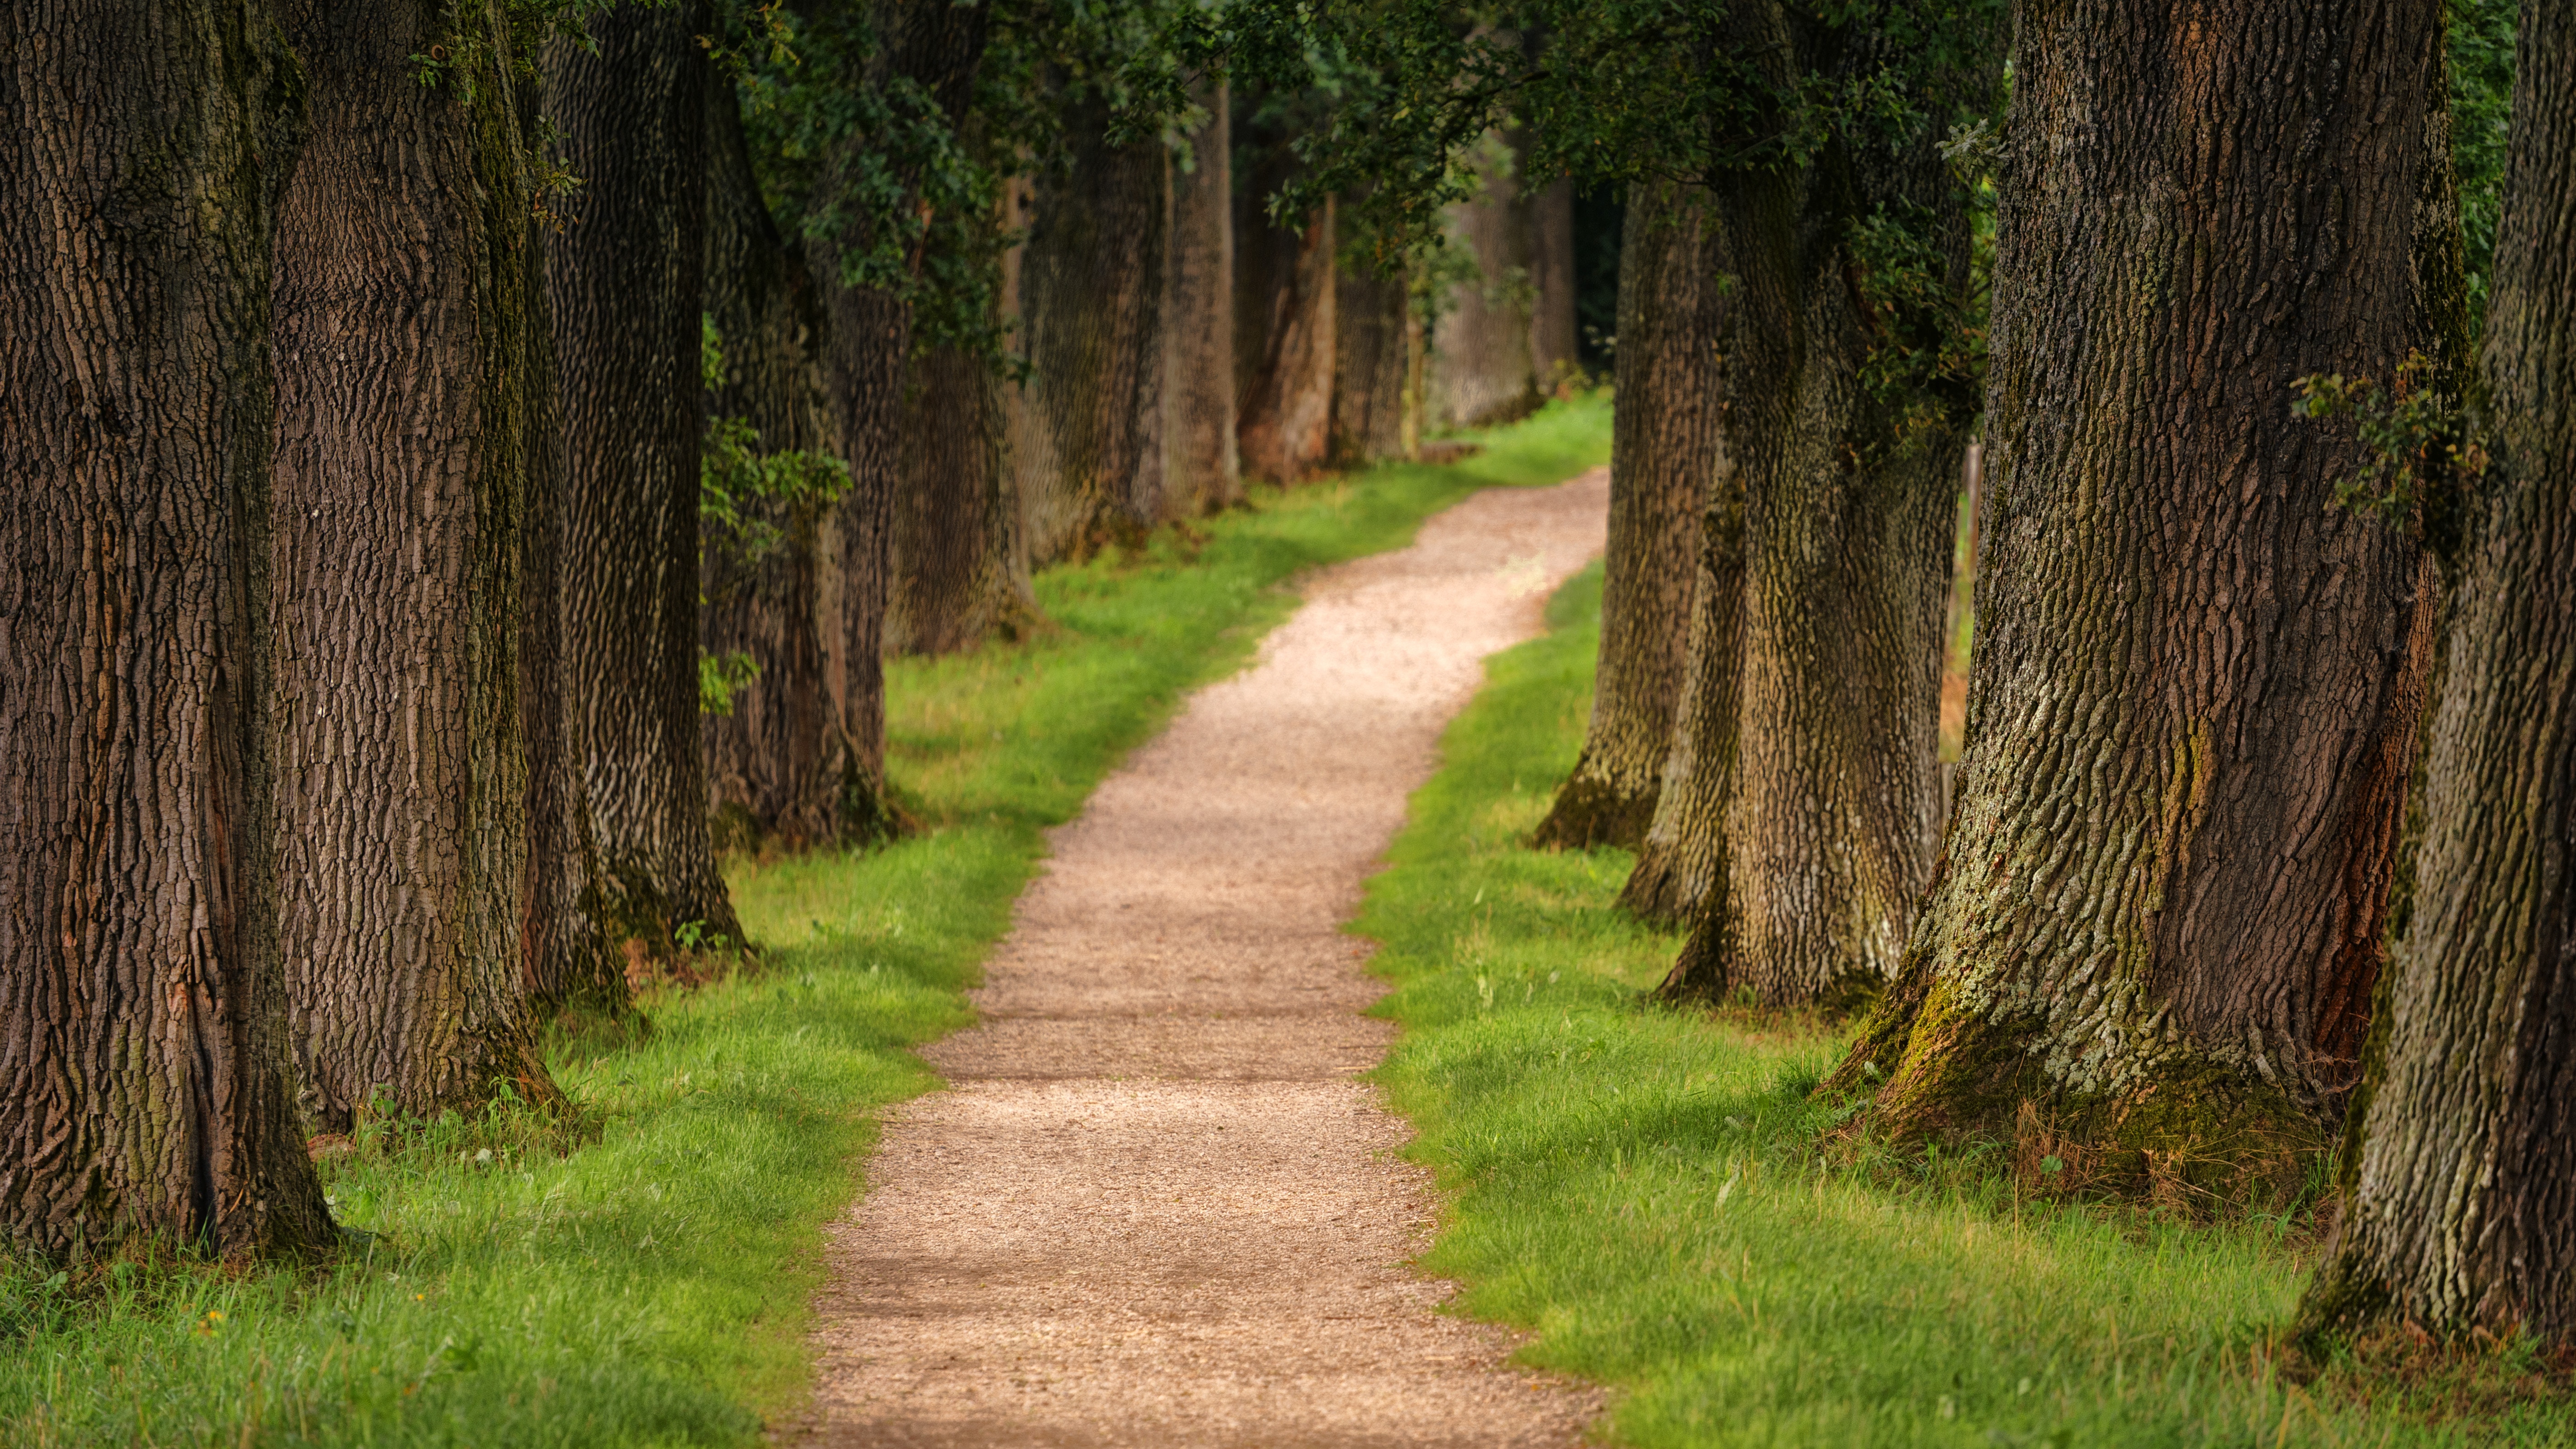 A path between rows of trees